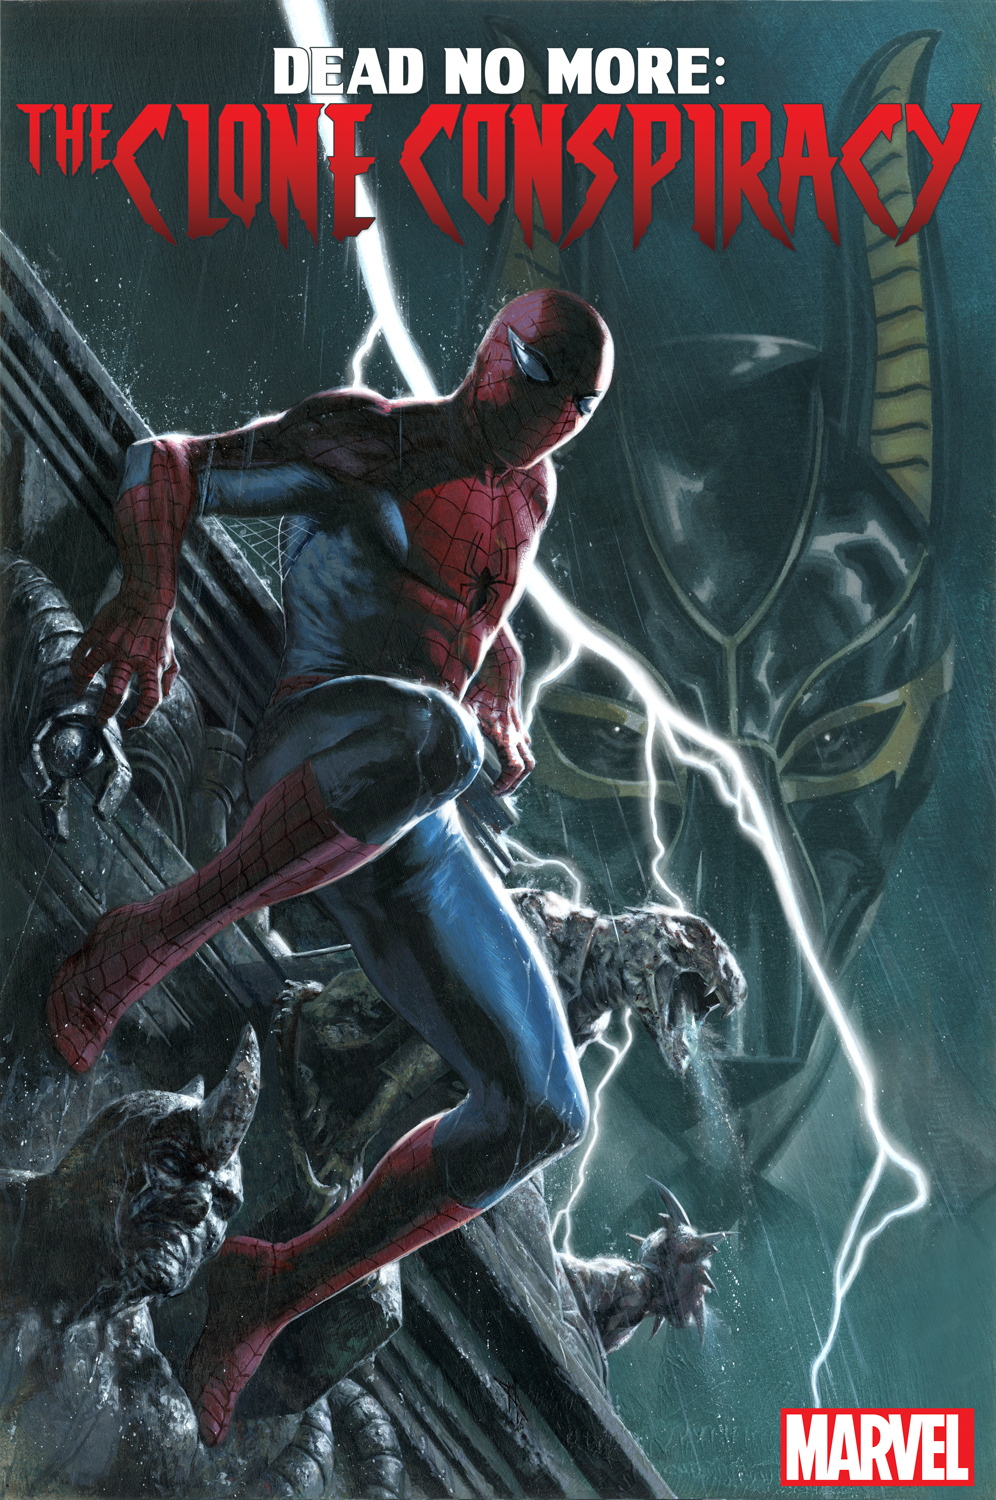 THE CLONE CONSPIRACY #1 cover by Gabriele Dell'Otto